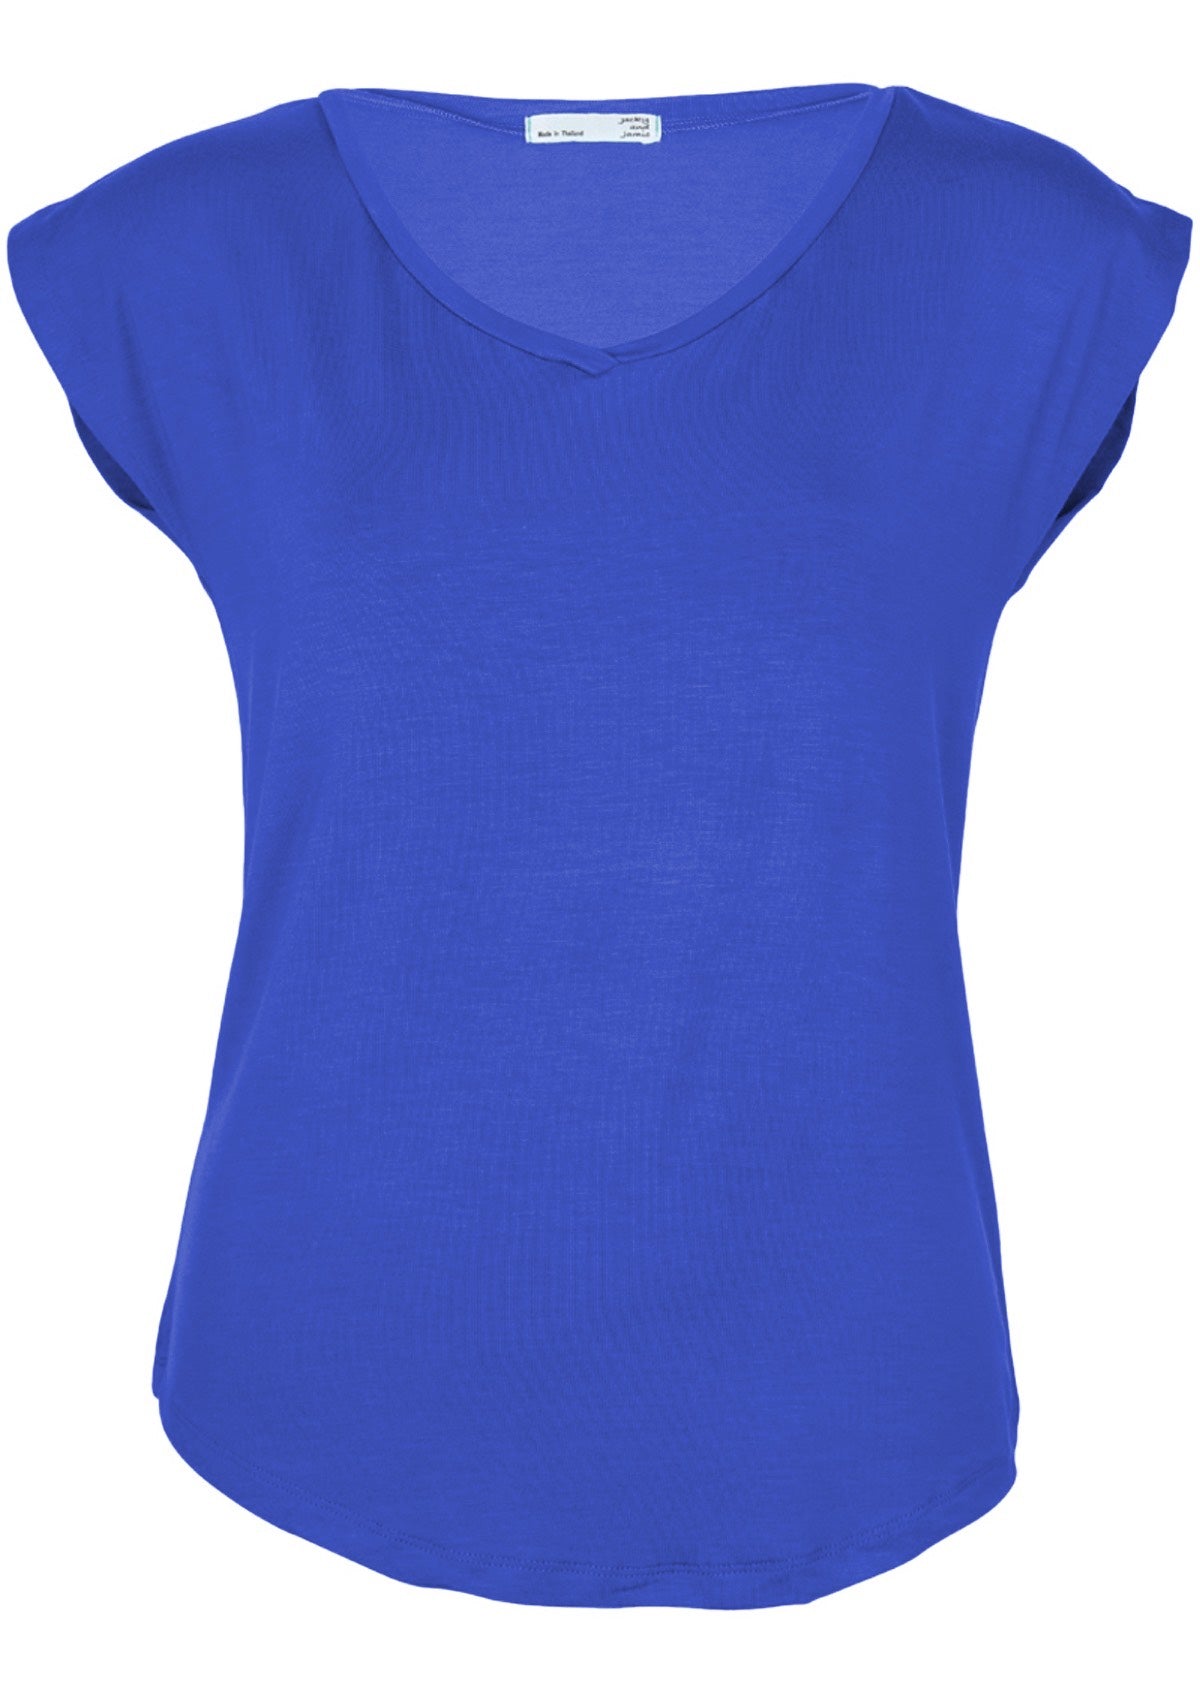 Front view of a women's blue v-neck short cap sleeve rayon top